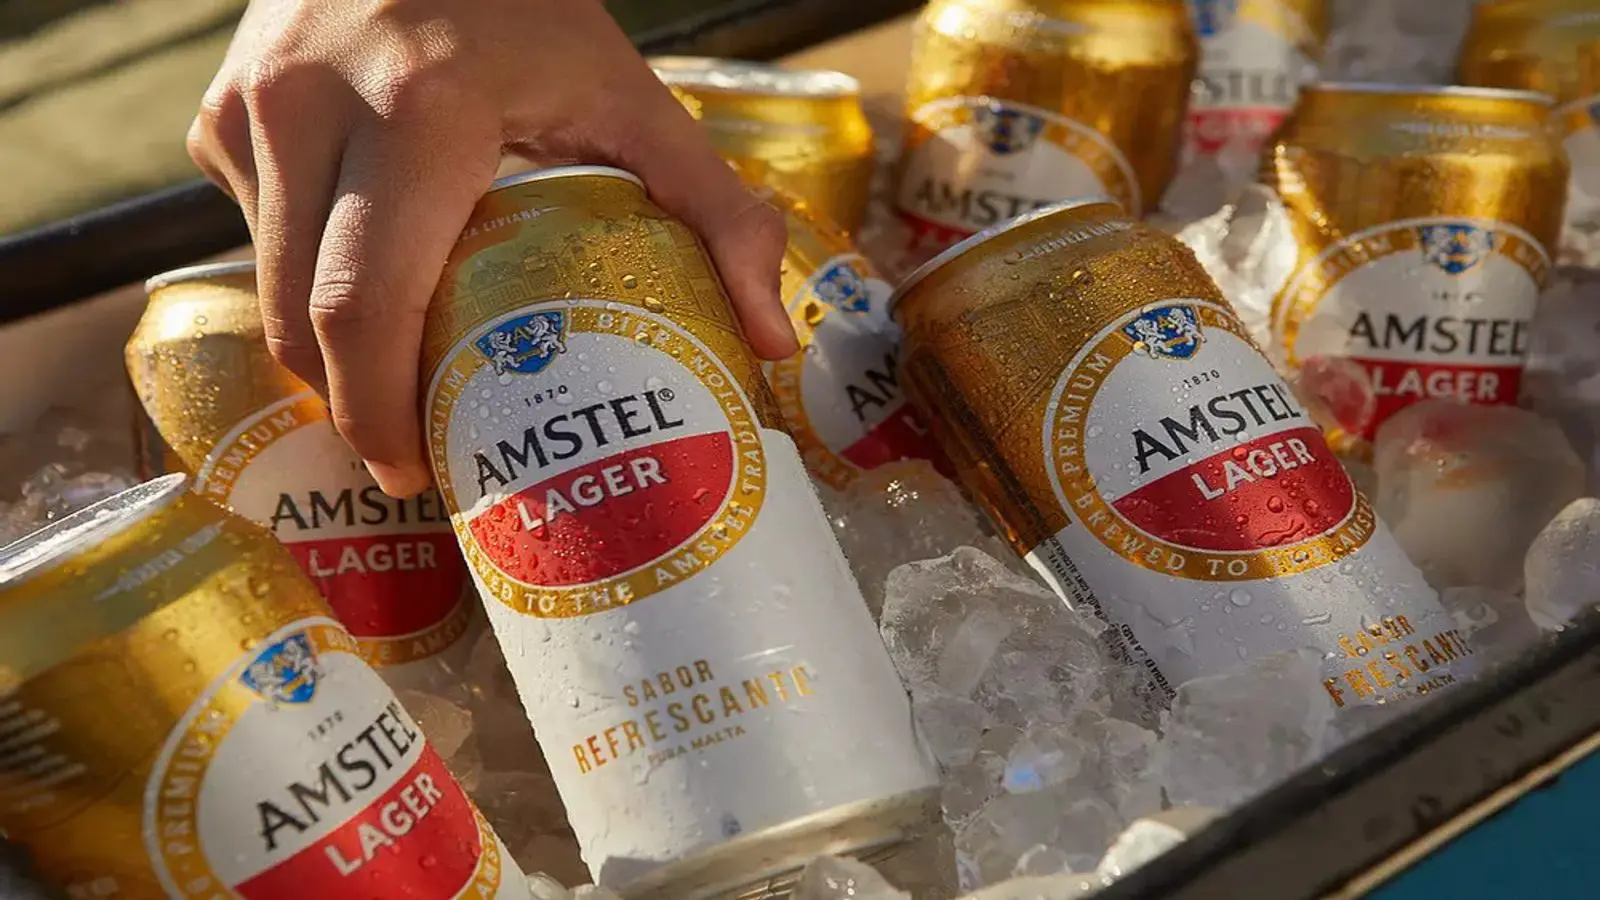 Amstel Lager rebrands its beer packaging to be more appealing to consumers